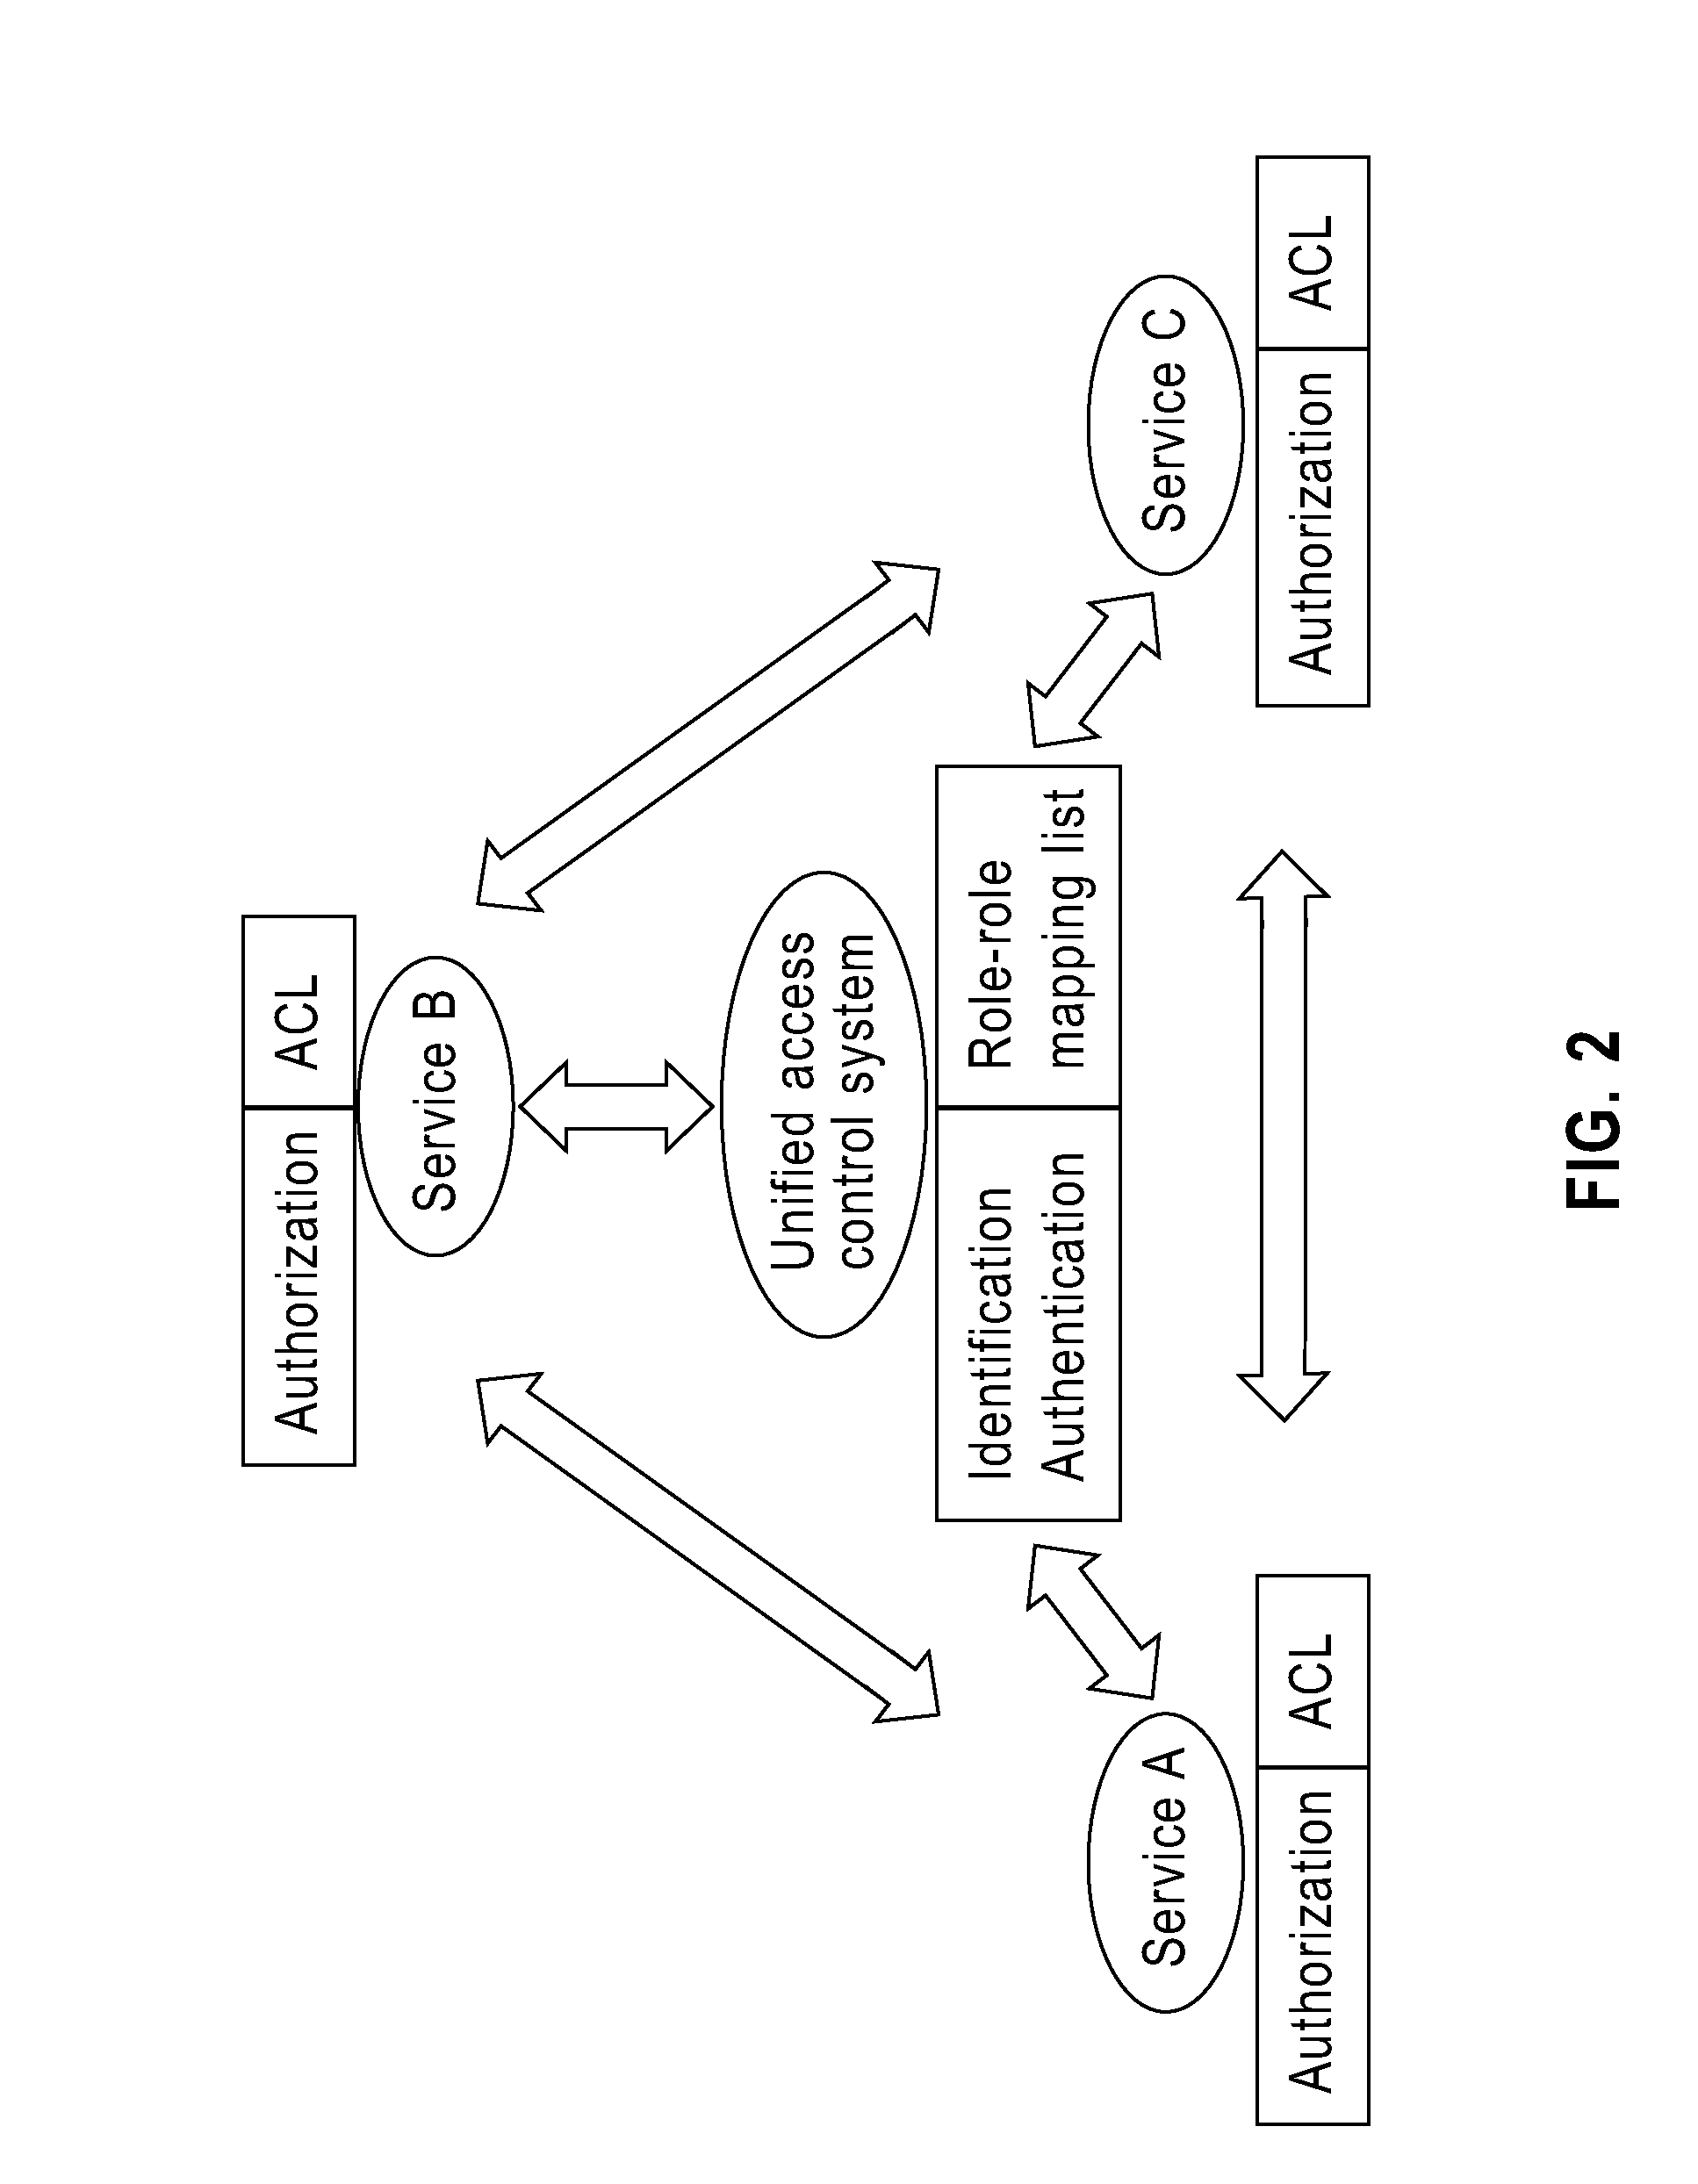 Unified access control system and method for composed services in a distributed environment